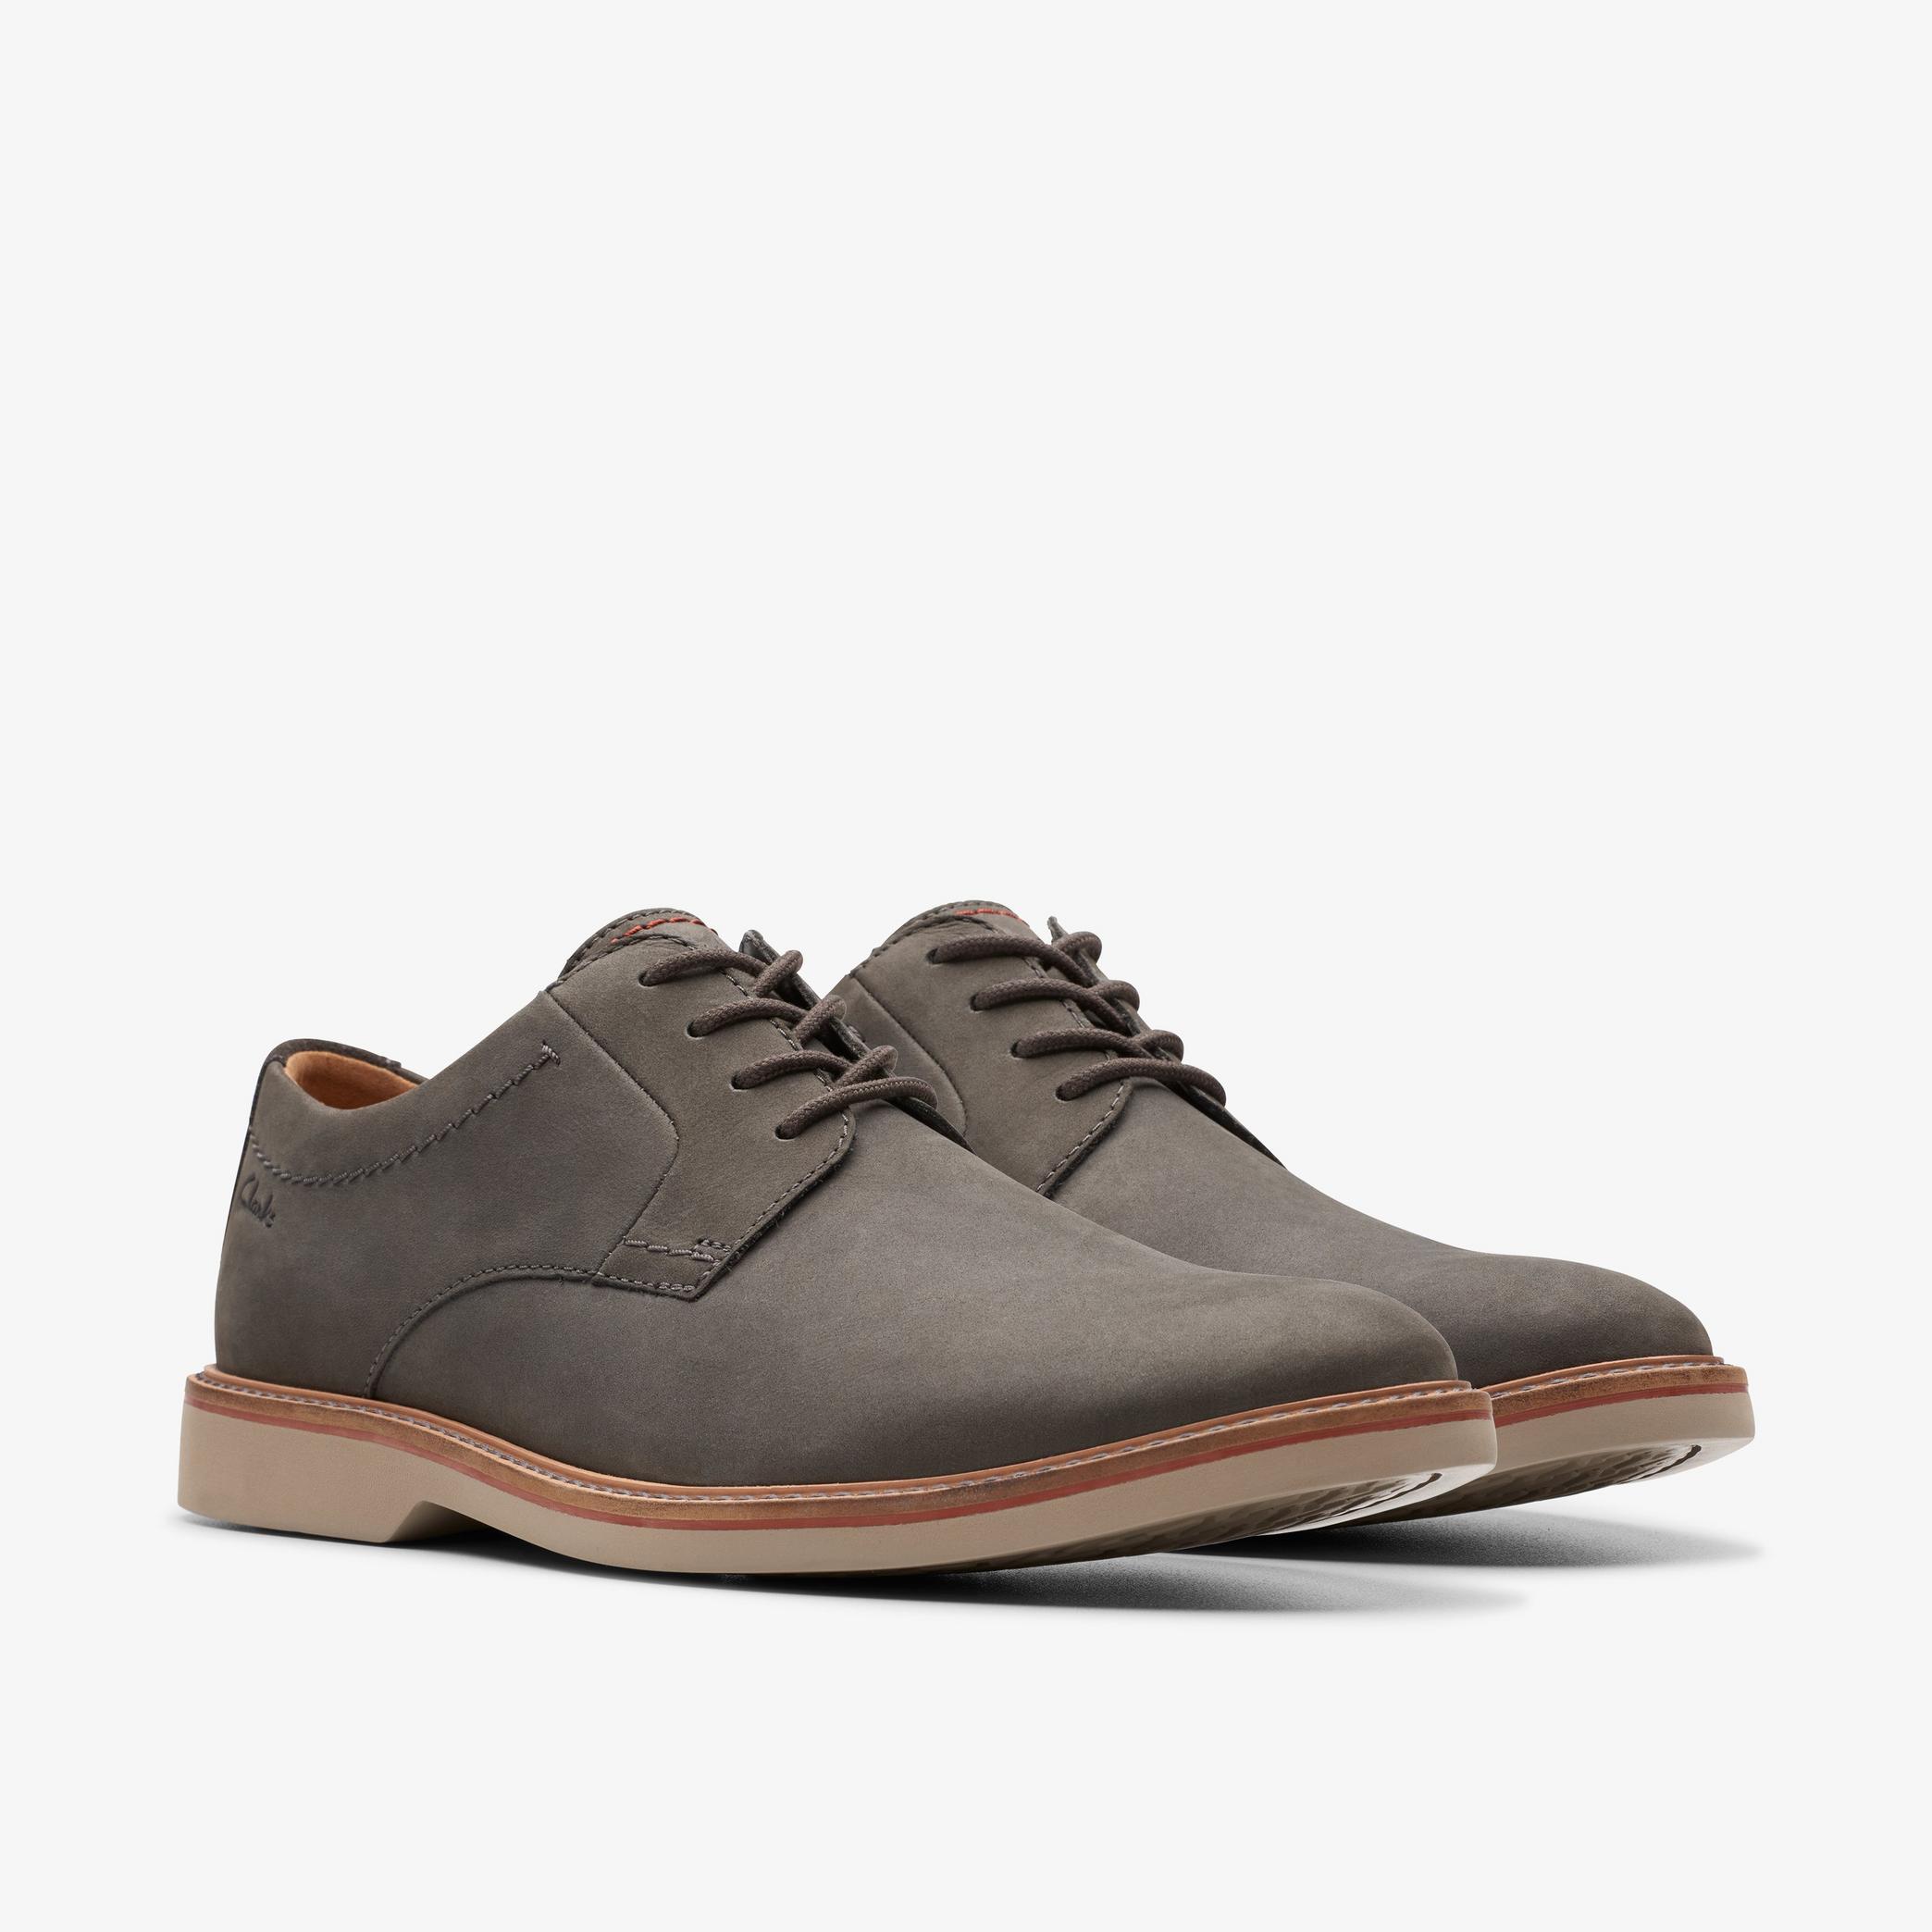 Atticus LT Lace Dark Grey Nubuck Oxford Shoes, view 4 of 6